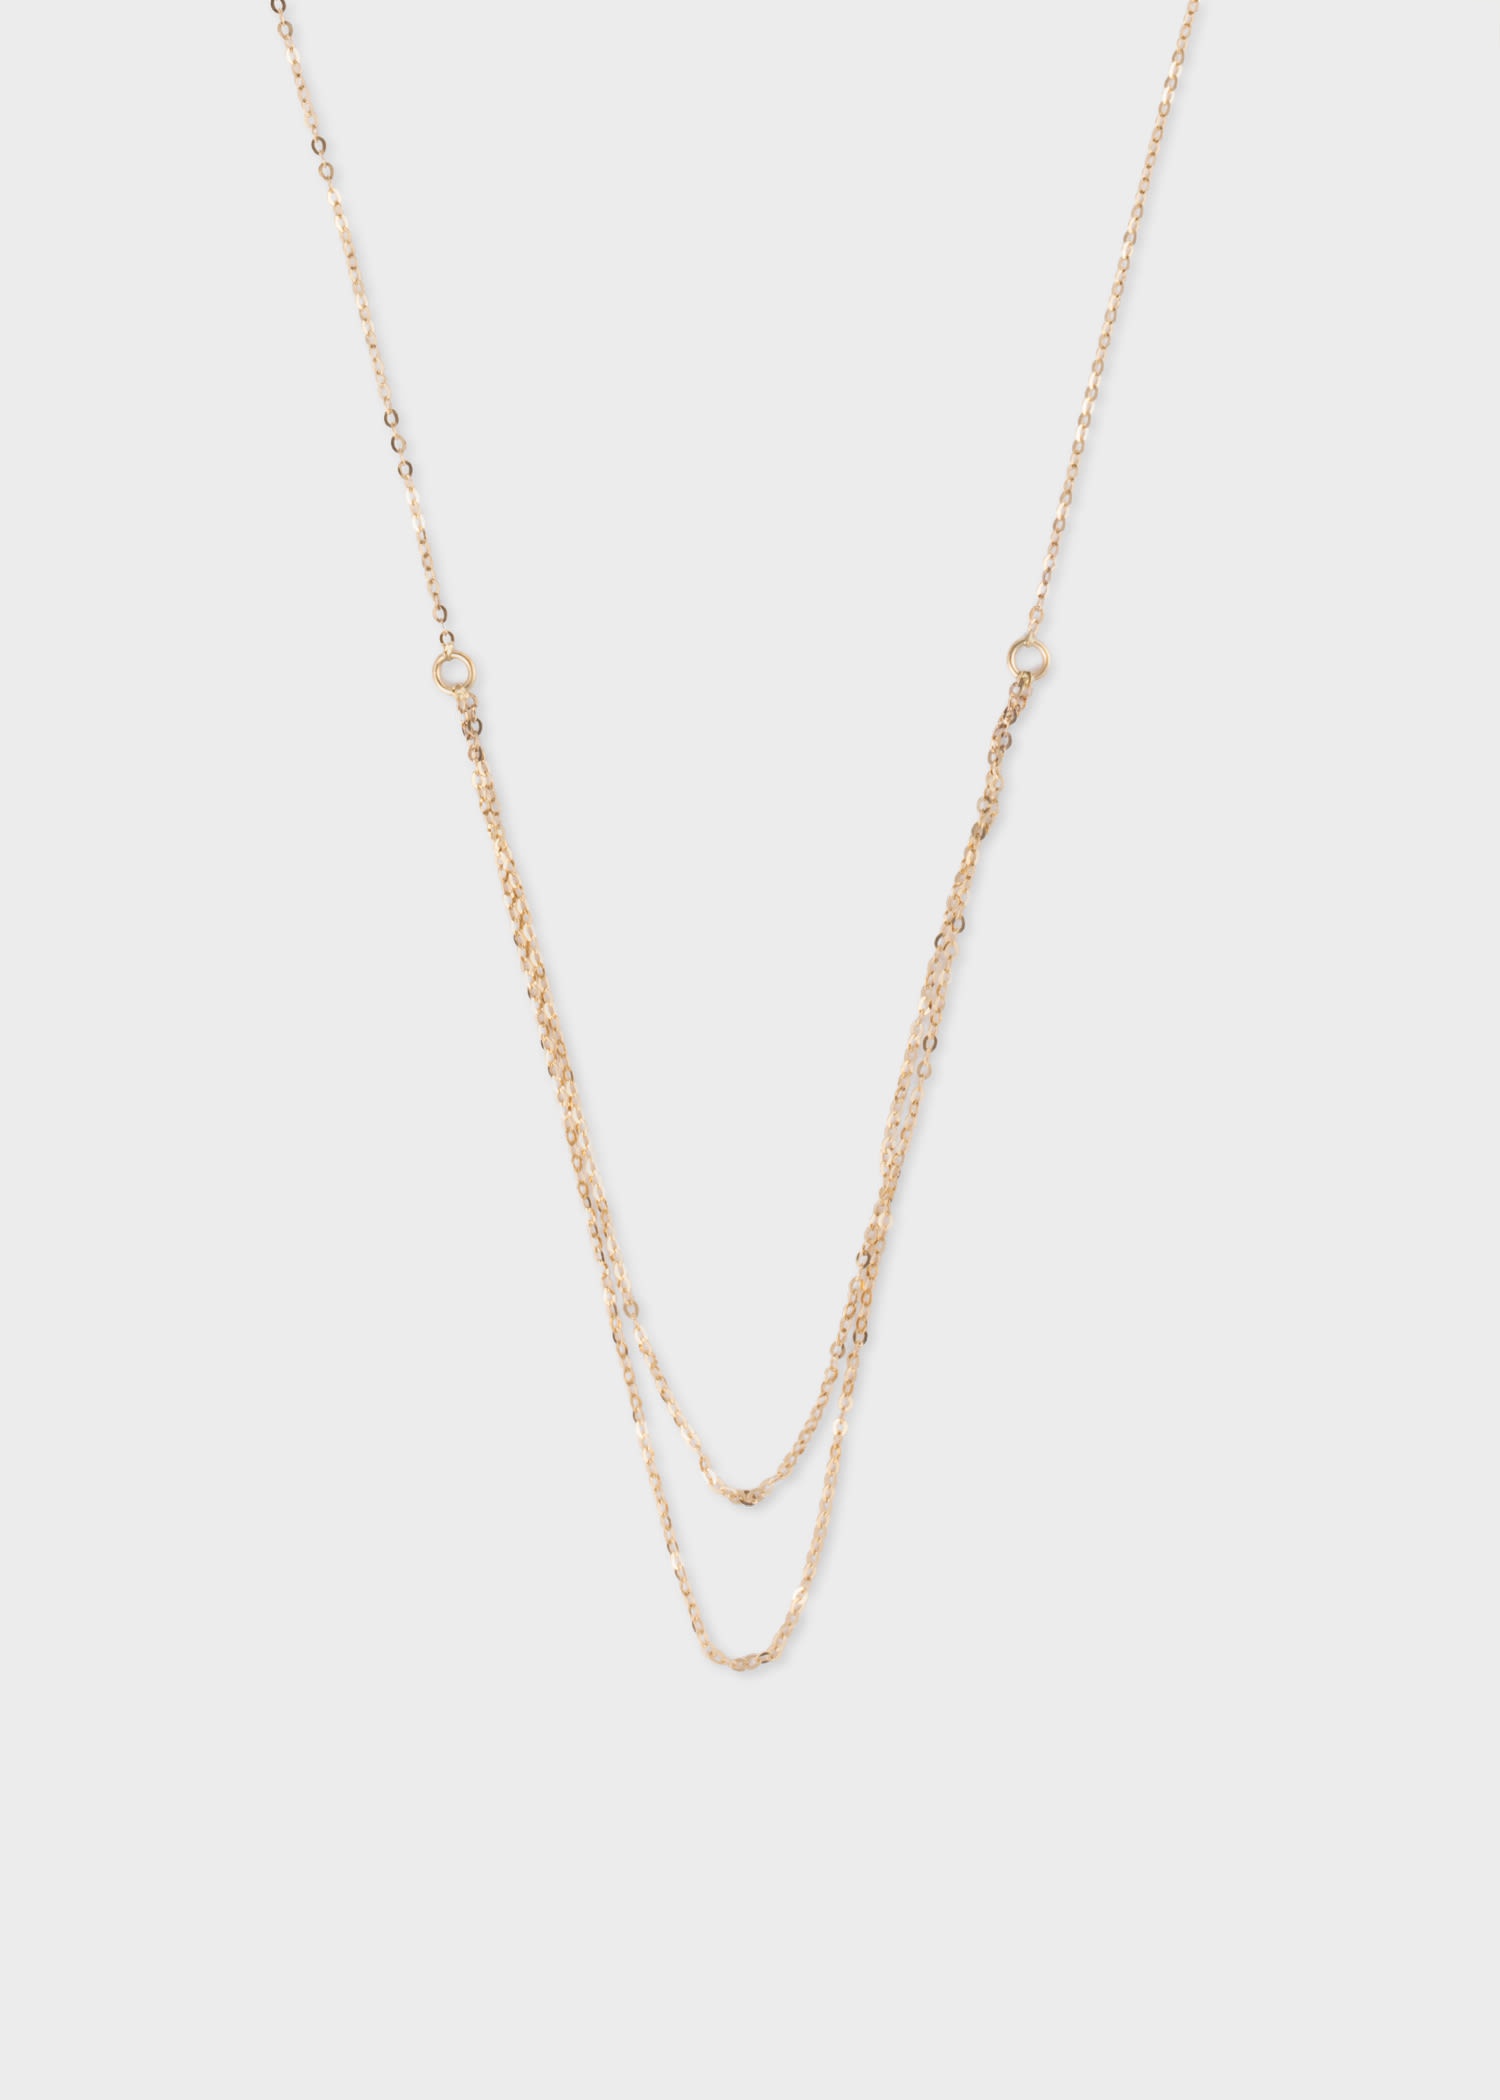 'Charlotte' Gold Double Chain Necklace by Helena Rohner - 1